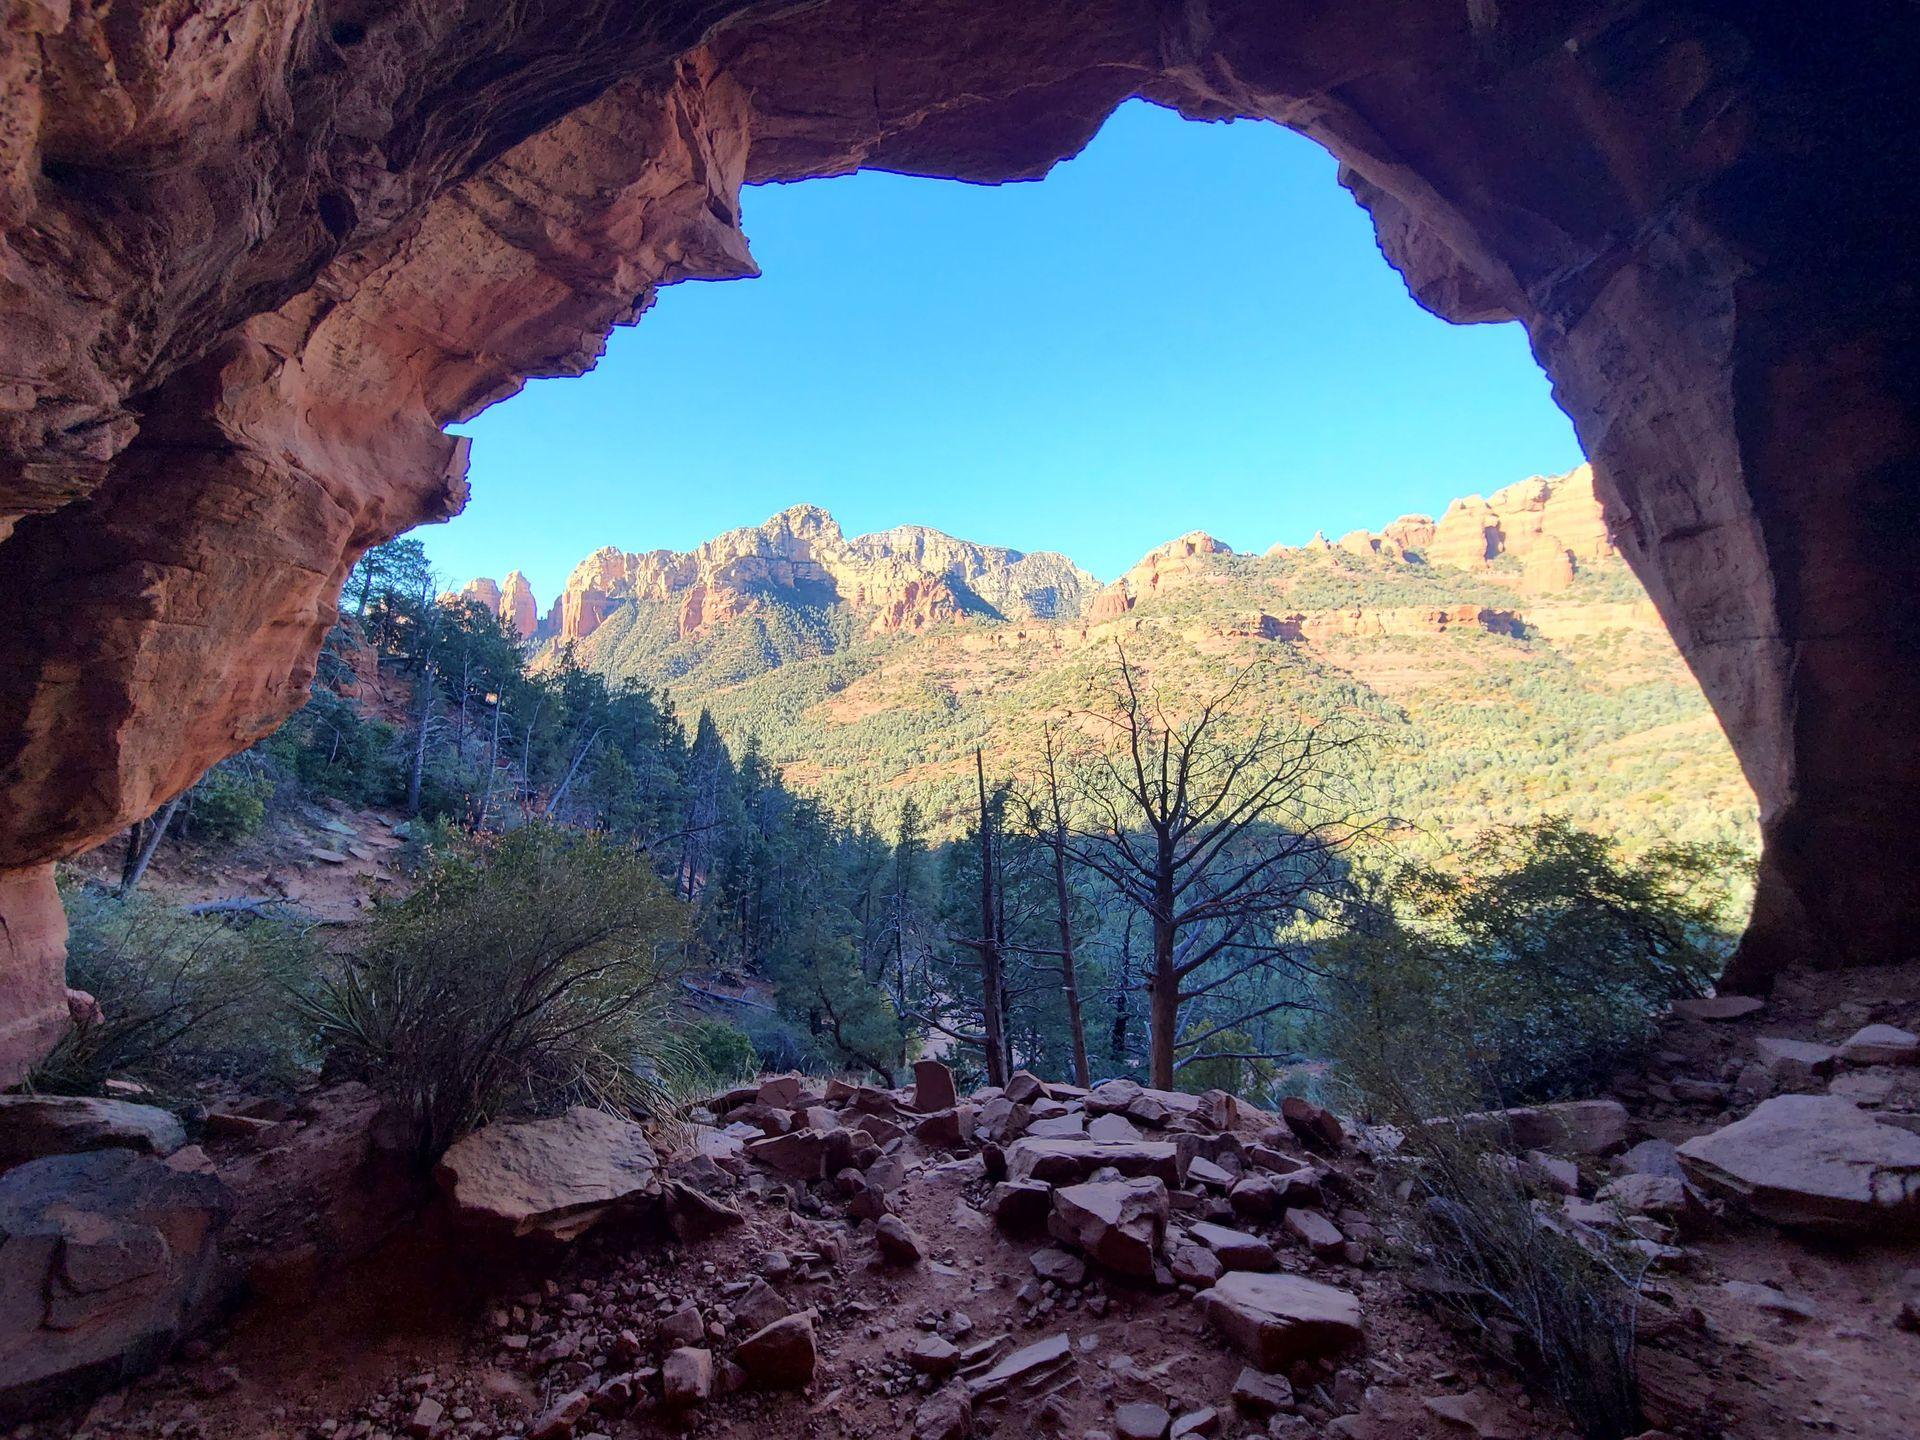 Looking out from an orange rock cave on the Soldier's Pass trail